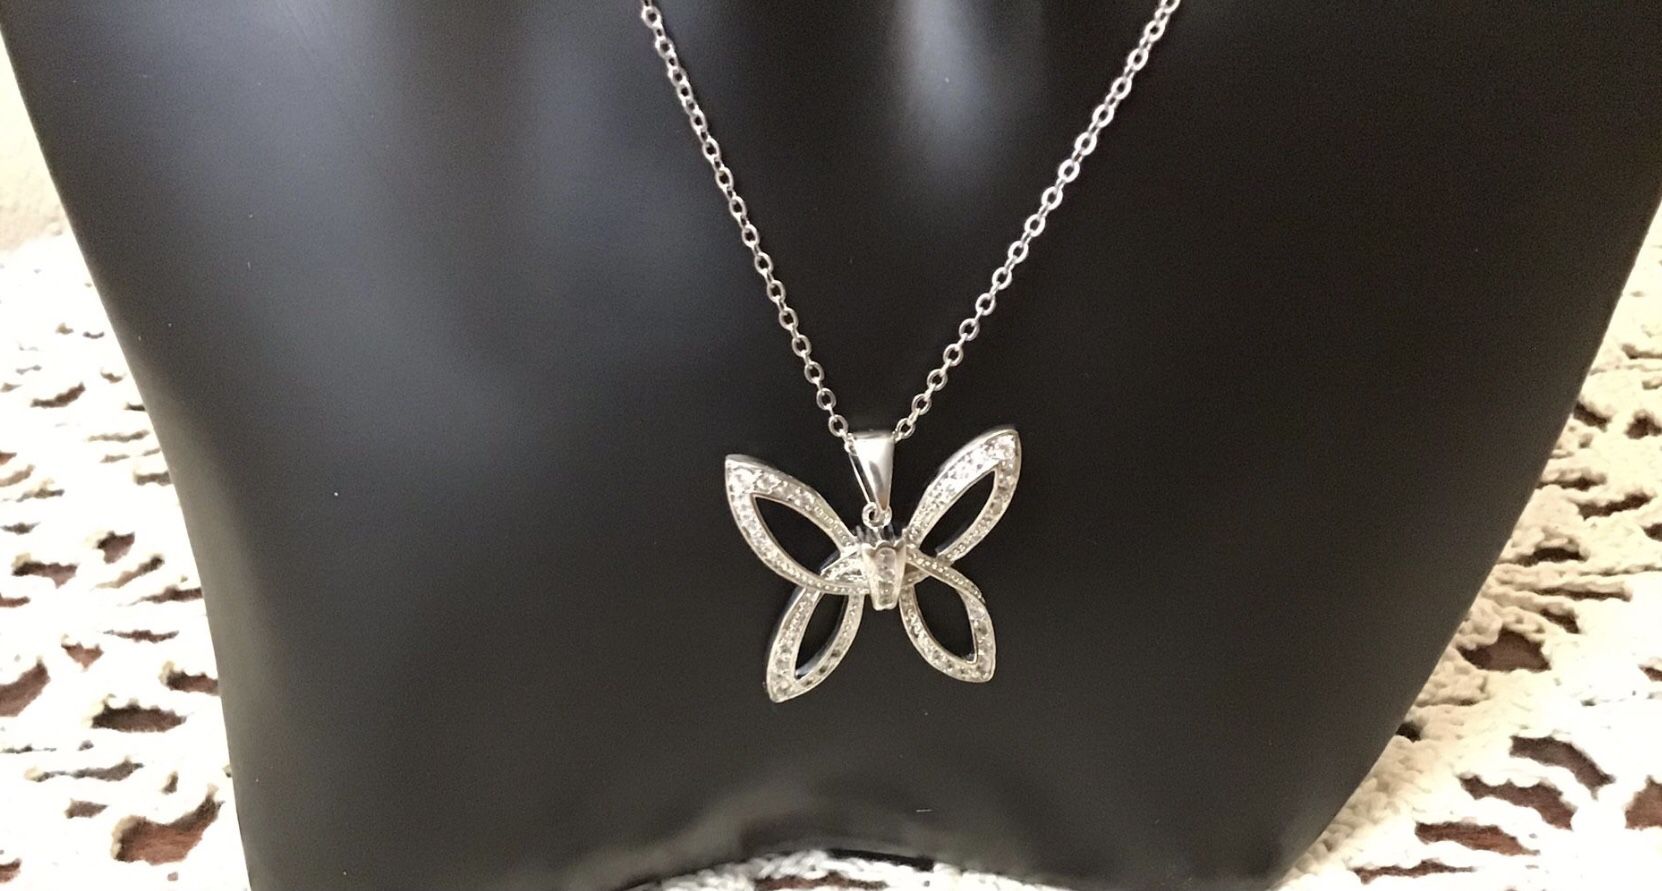 NWT Cookie Lee Vintage Silver Tone Genuine Cubic Zirconia Butterfly Pendant on Adjustable Necklace